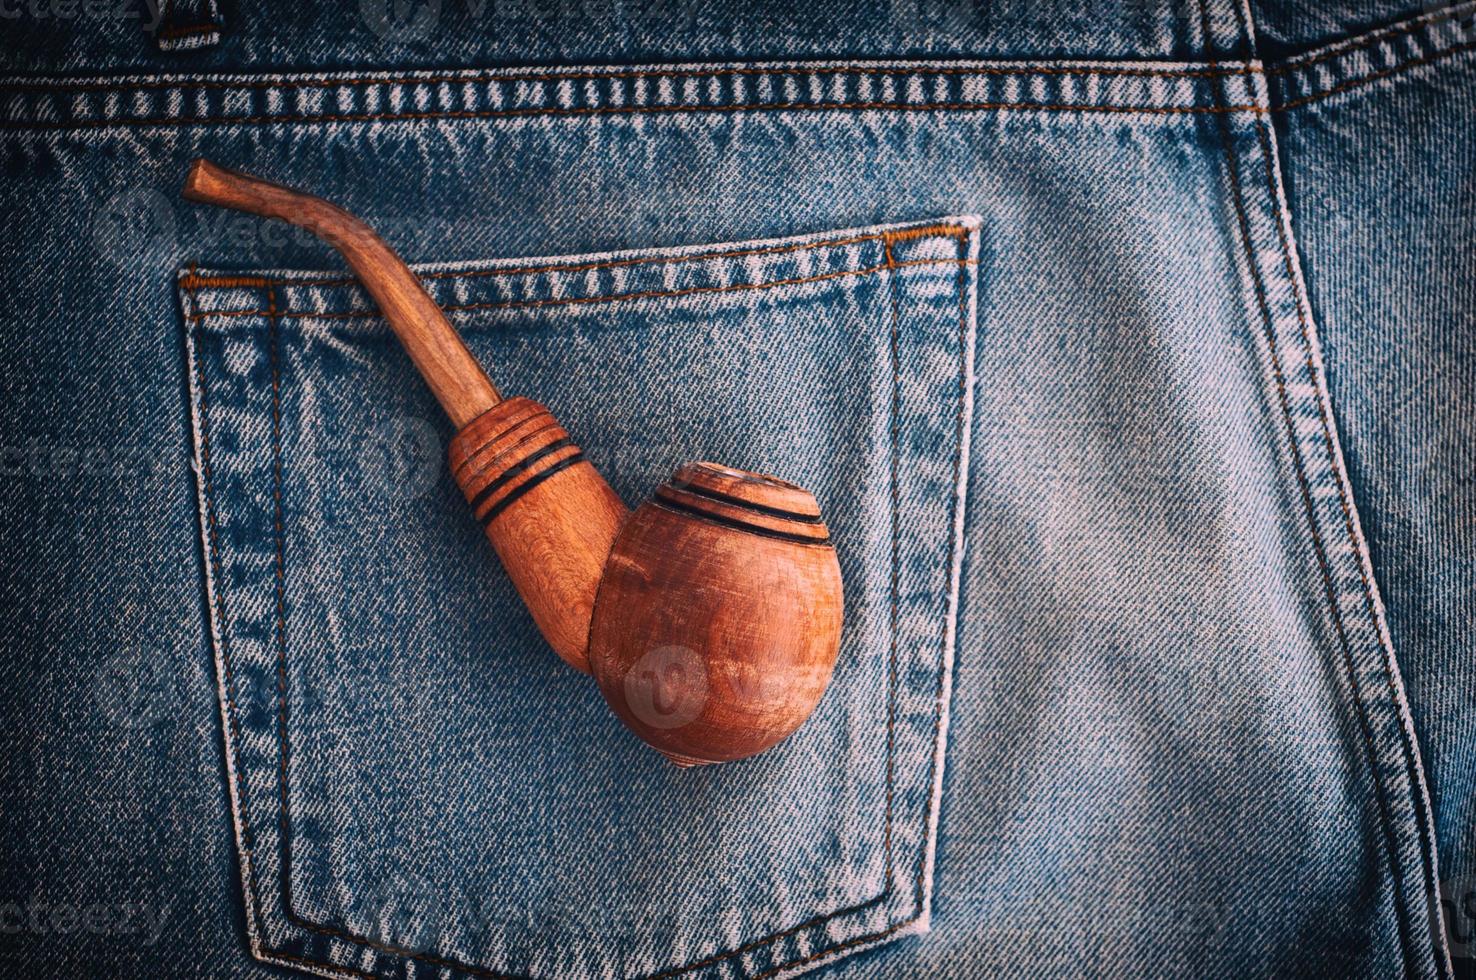 Wooden pipe for tobacco is in the back pocket of old blue jeans photo